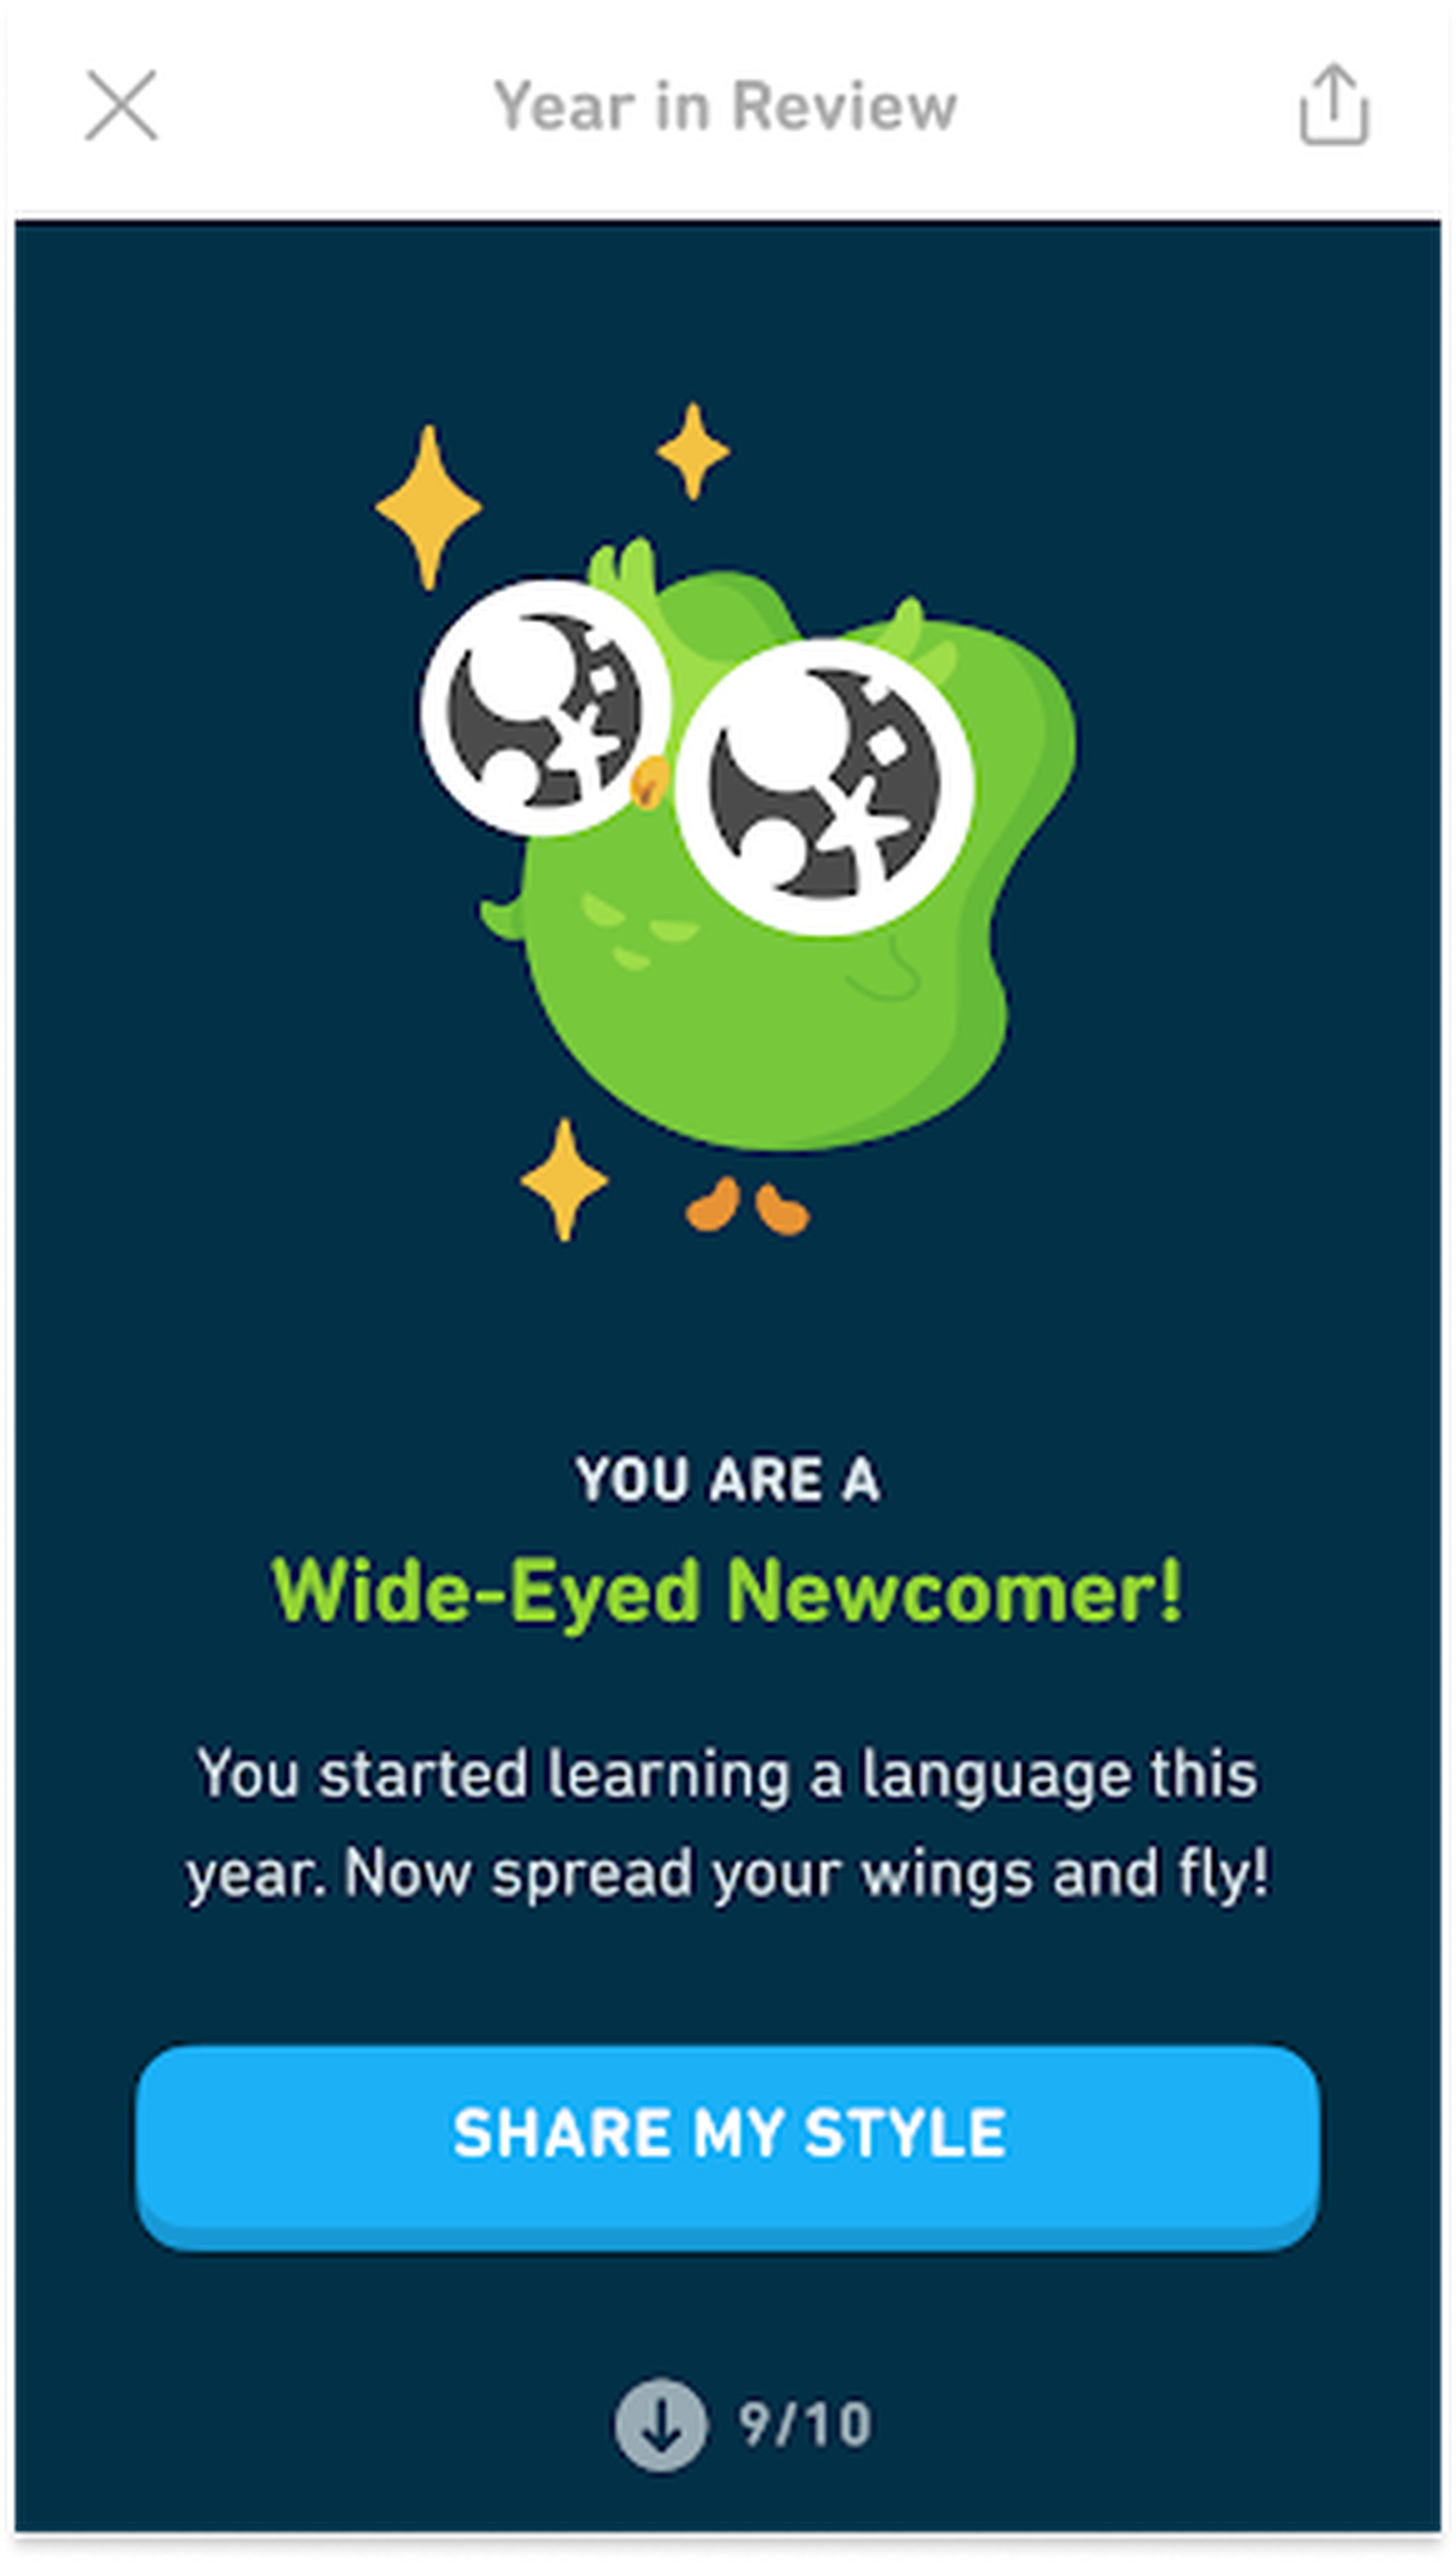 Duolingo’s Year in Review will tell you want kind of language learner you were in 2021.